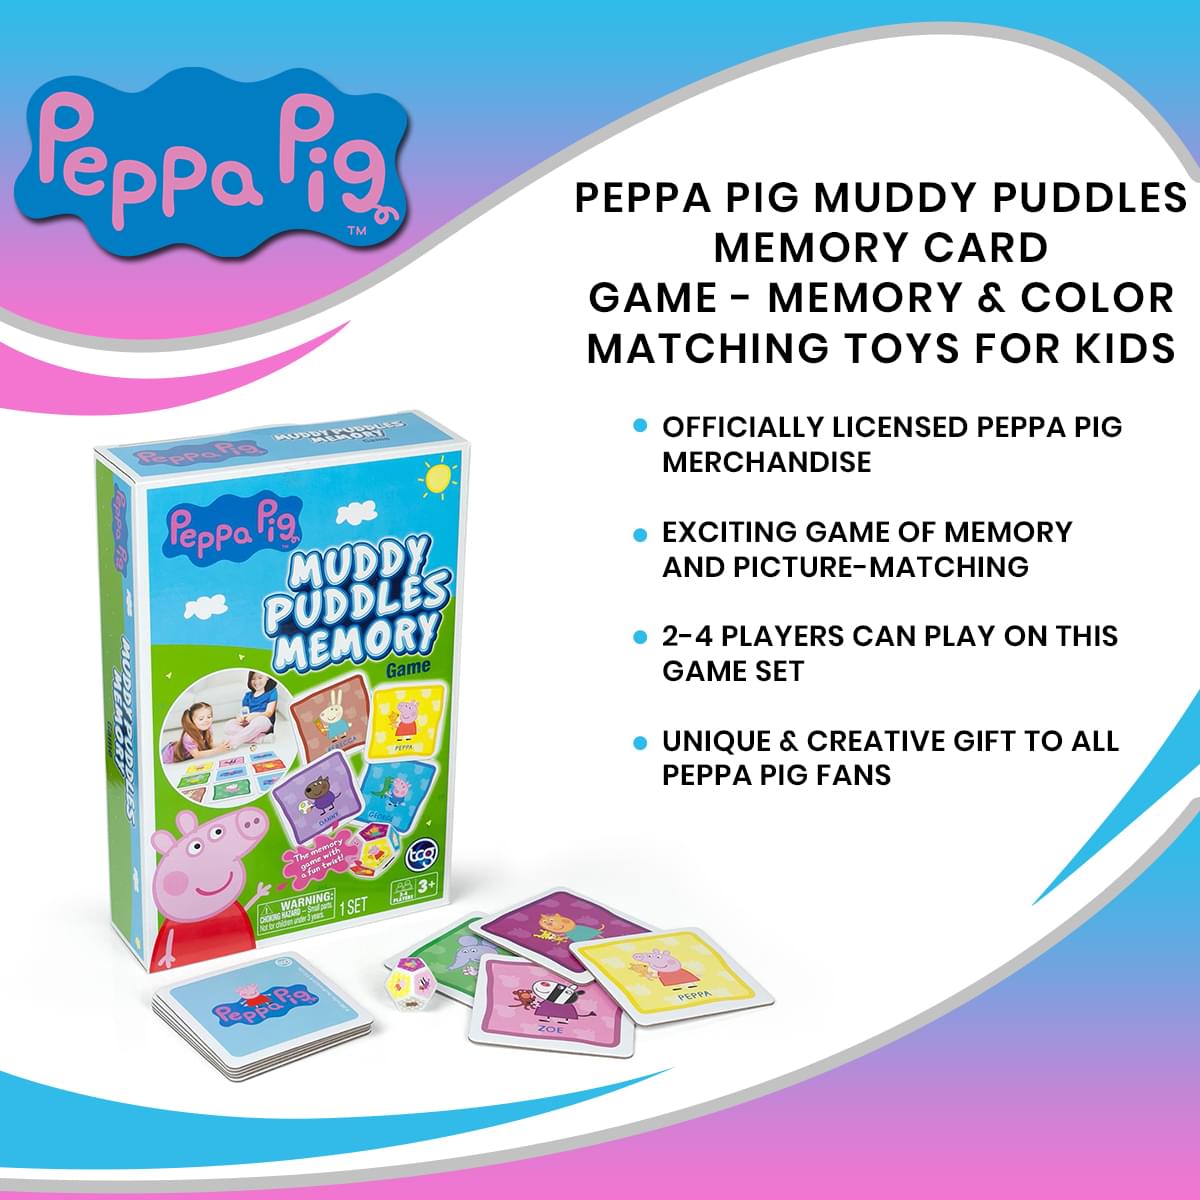 Peppa Pig Muddy Puddles Memory Card Game - Memory & Color Matching Toys for Kids